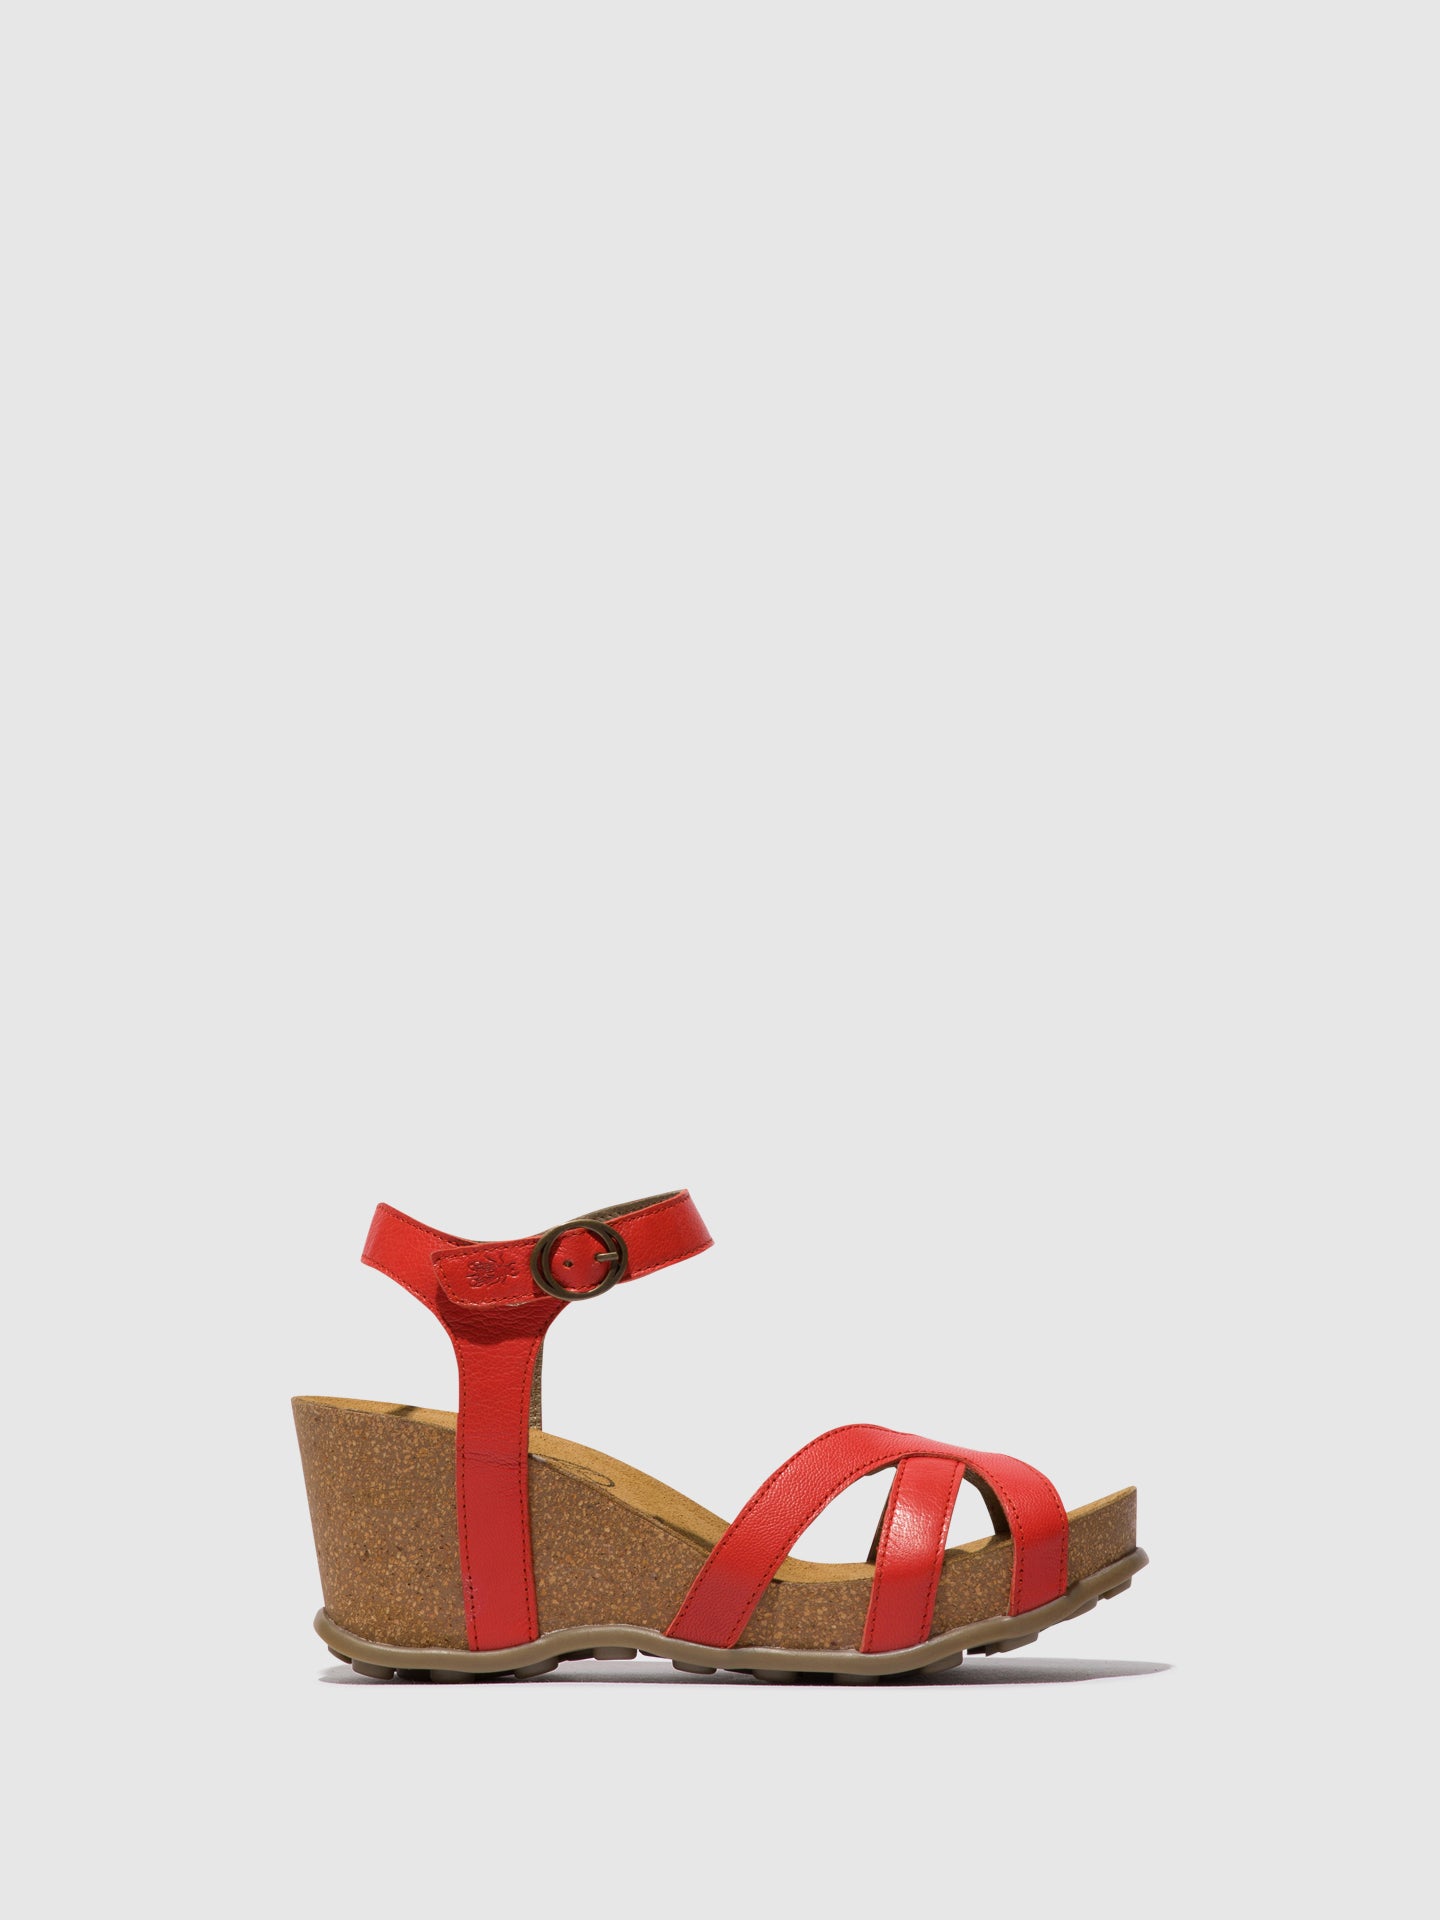 Fly London Ankle Strap Sandals GETA855FLY DEVIL RED